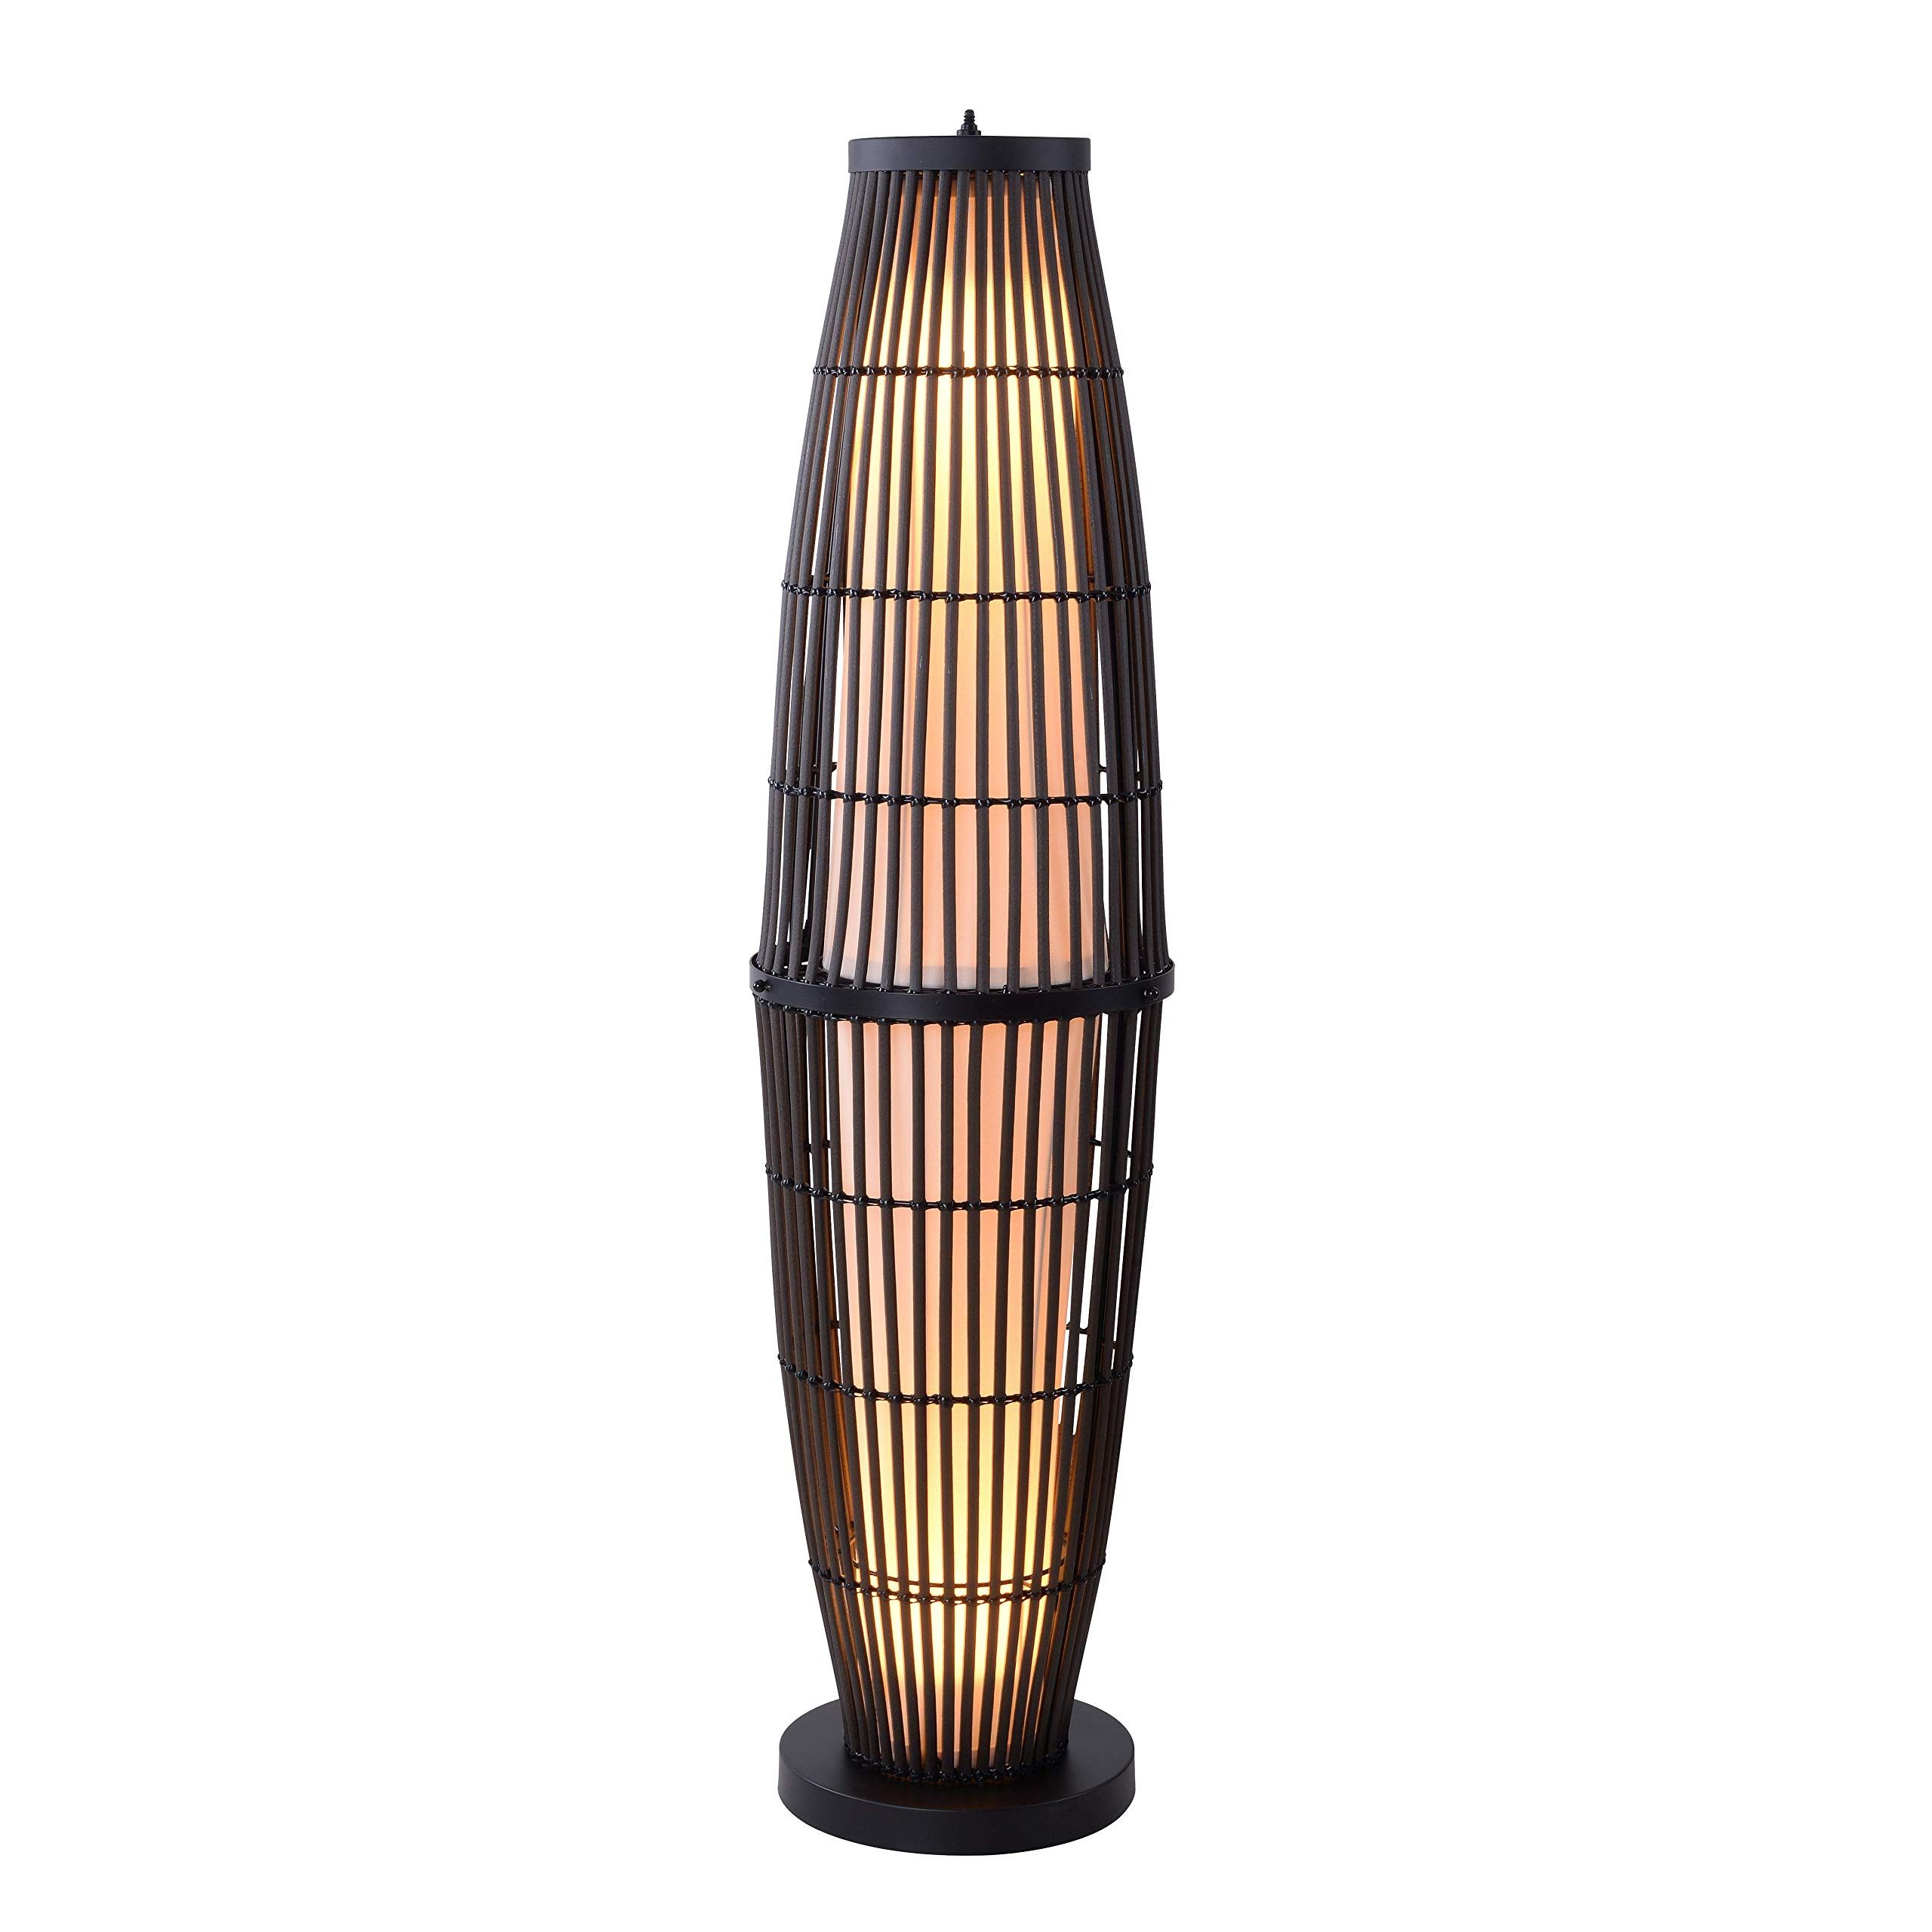 Most Recently Released Rattan Standing Lamps Within Amazon: Kenroy Home 32248rat Biscayne Floor Lamps, Small, Rattan With  Black Accents : Everything Else (View 3 of 15)